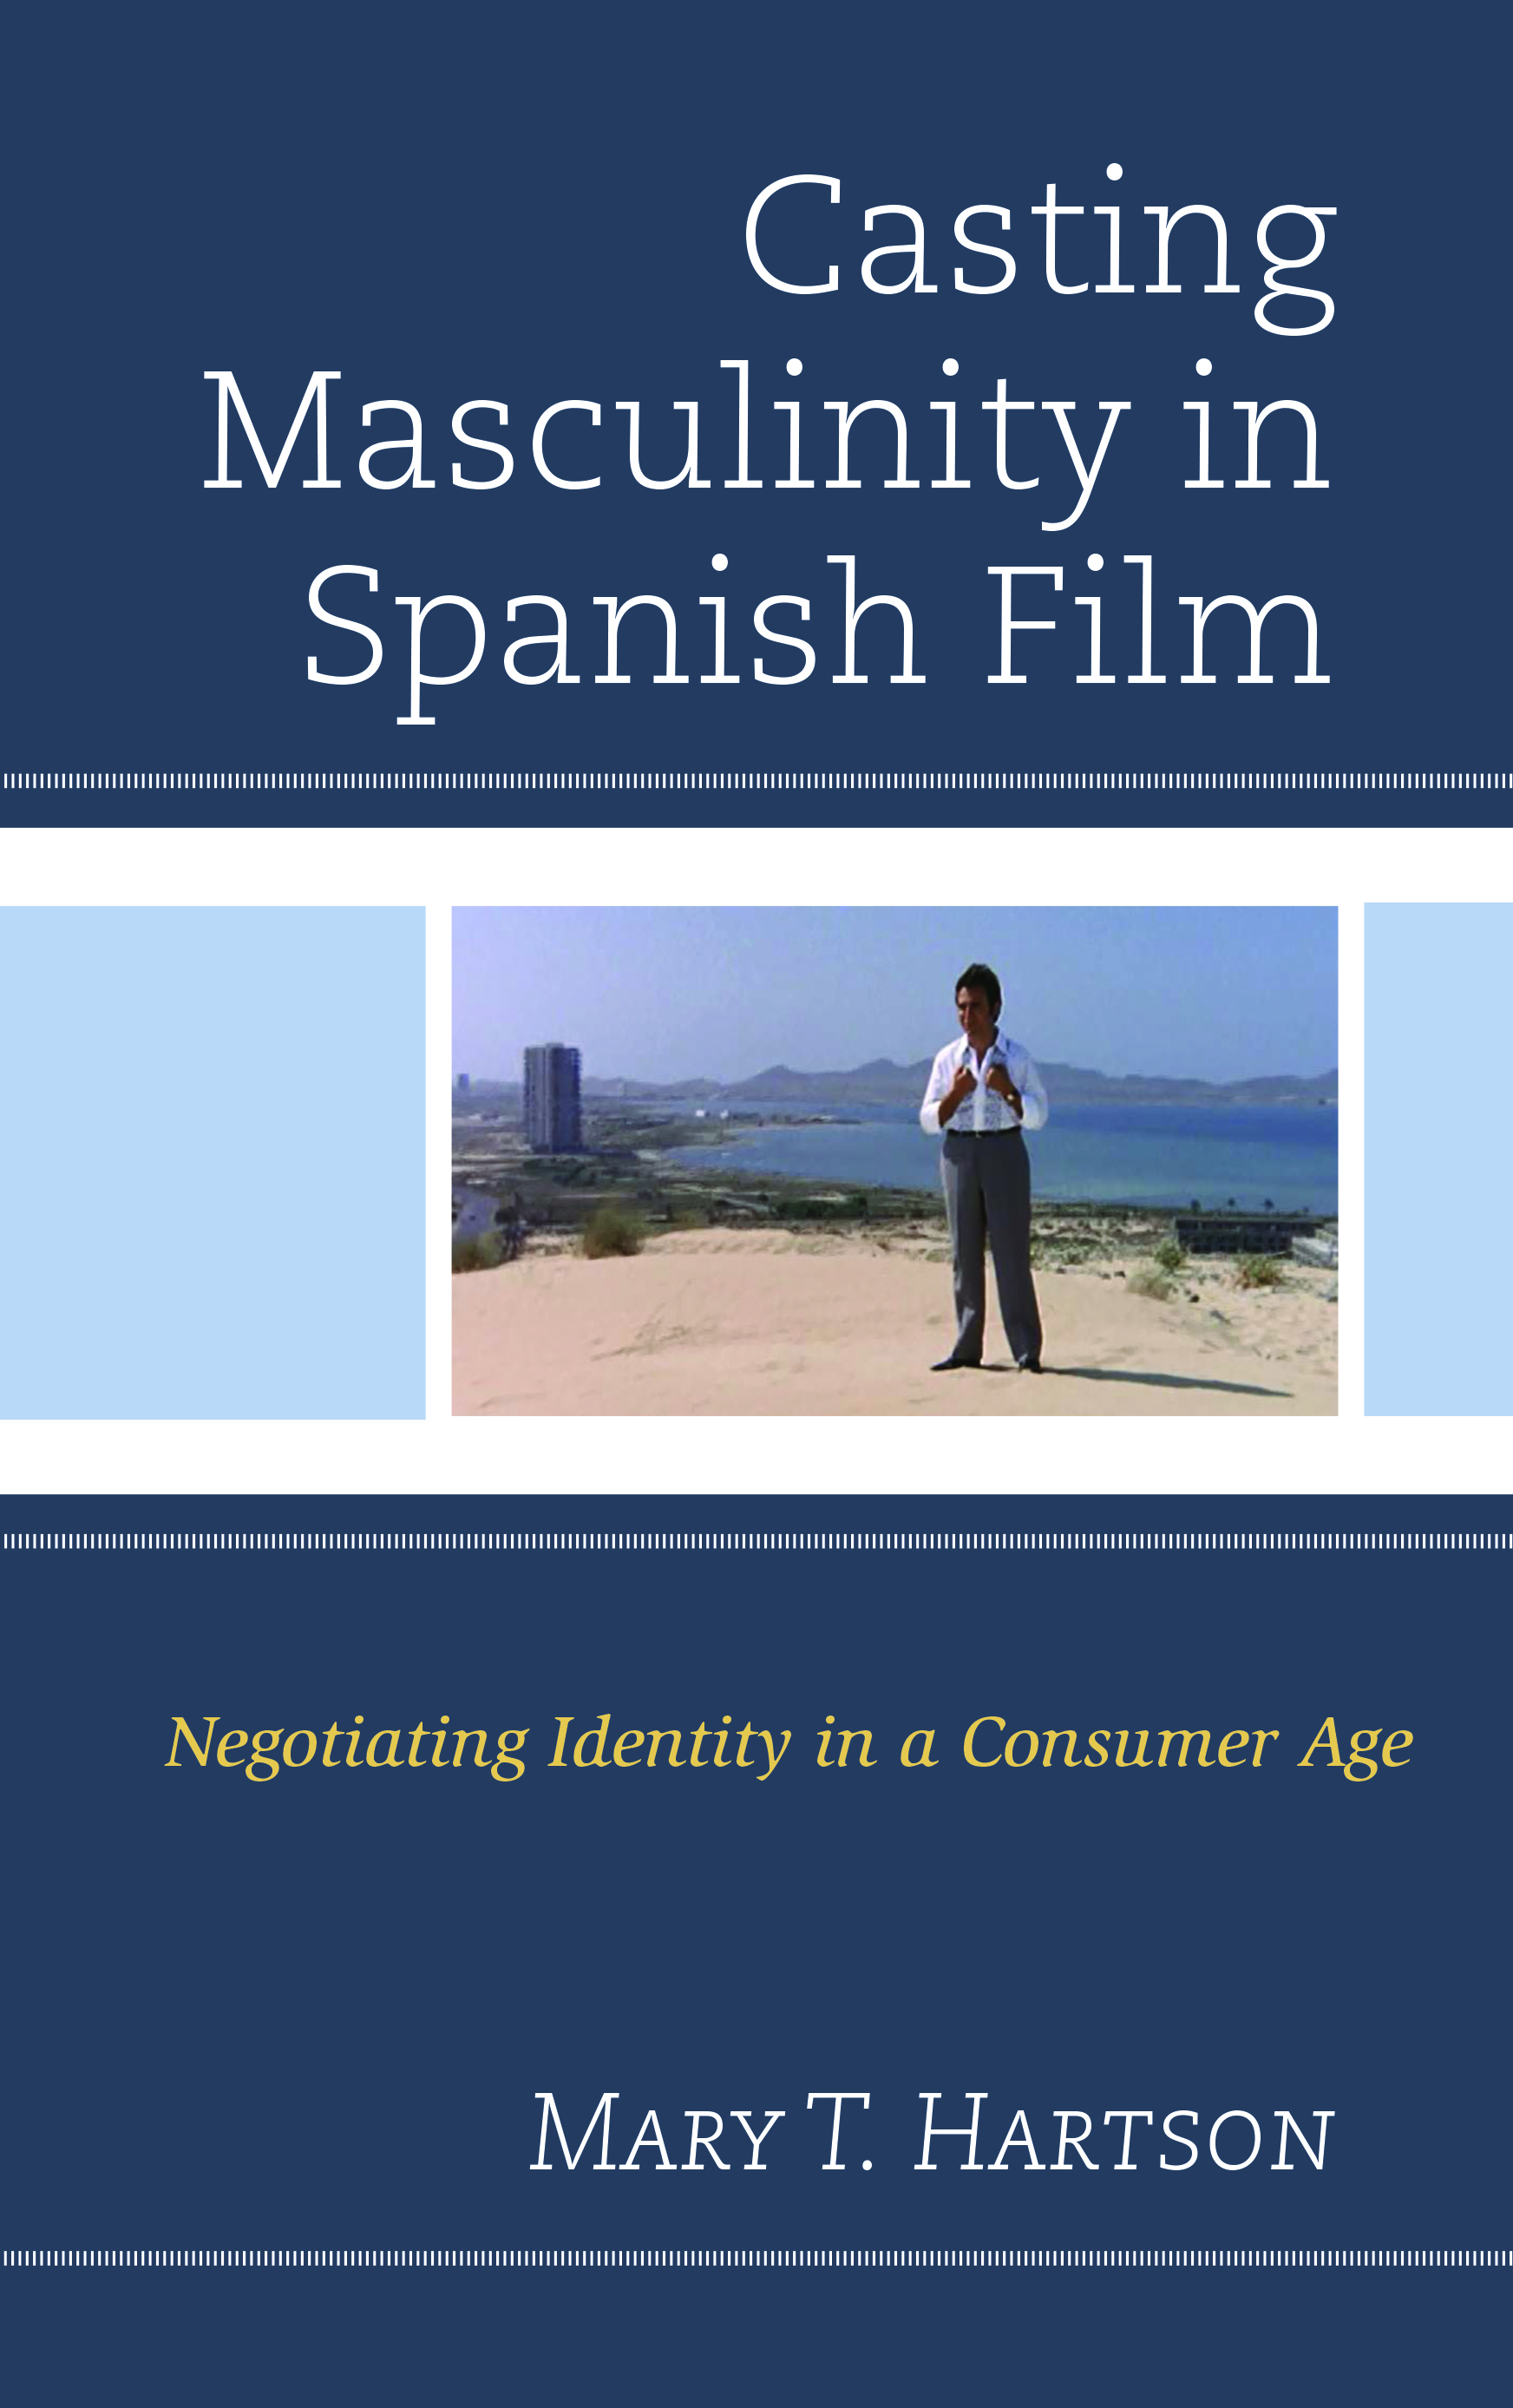 Casting Masculinity in Spanish Film: Negotiating Identity in a Consumer Age